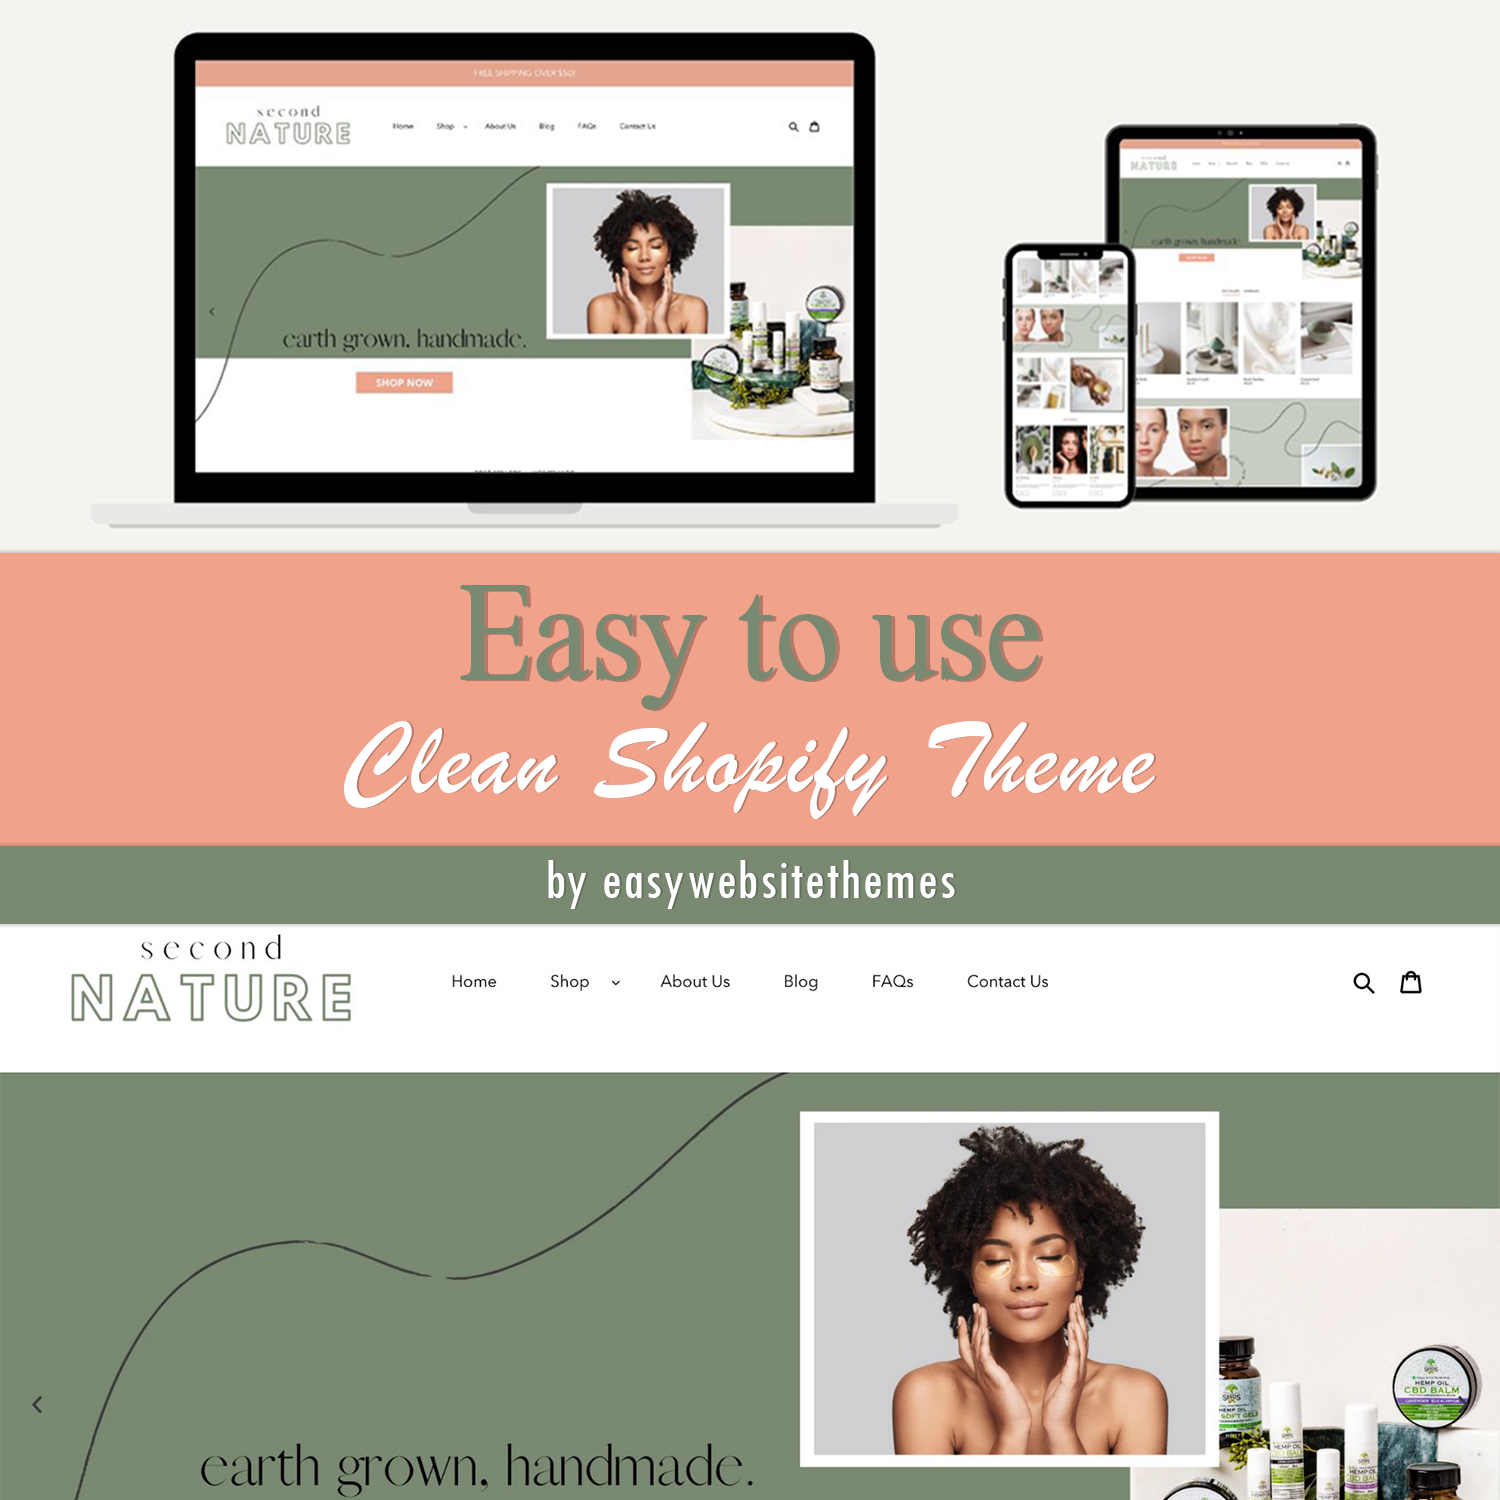 Illustration clean shopify theme i easy to use.